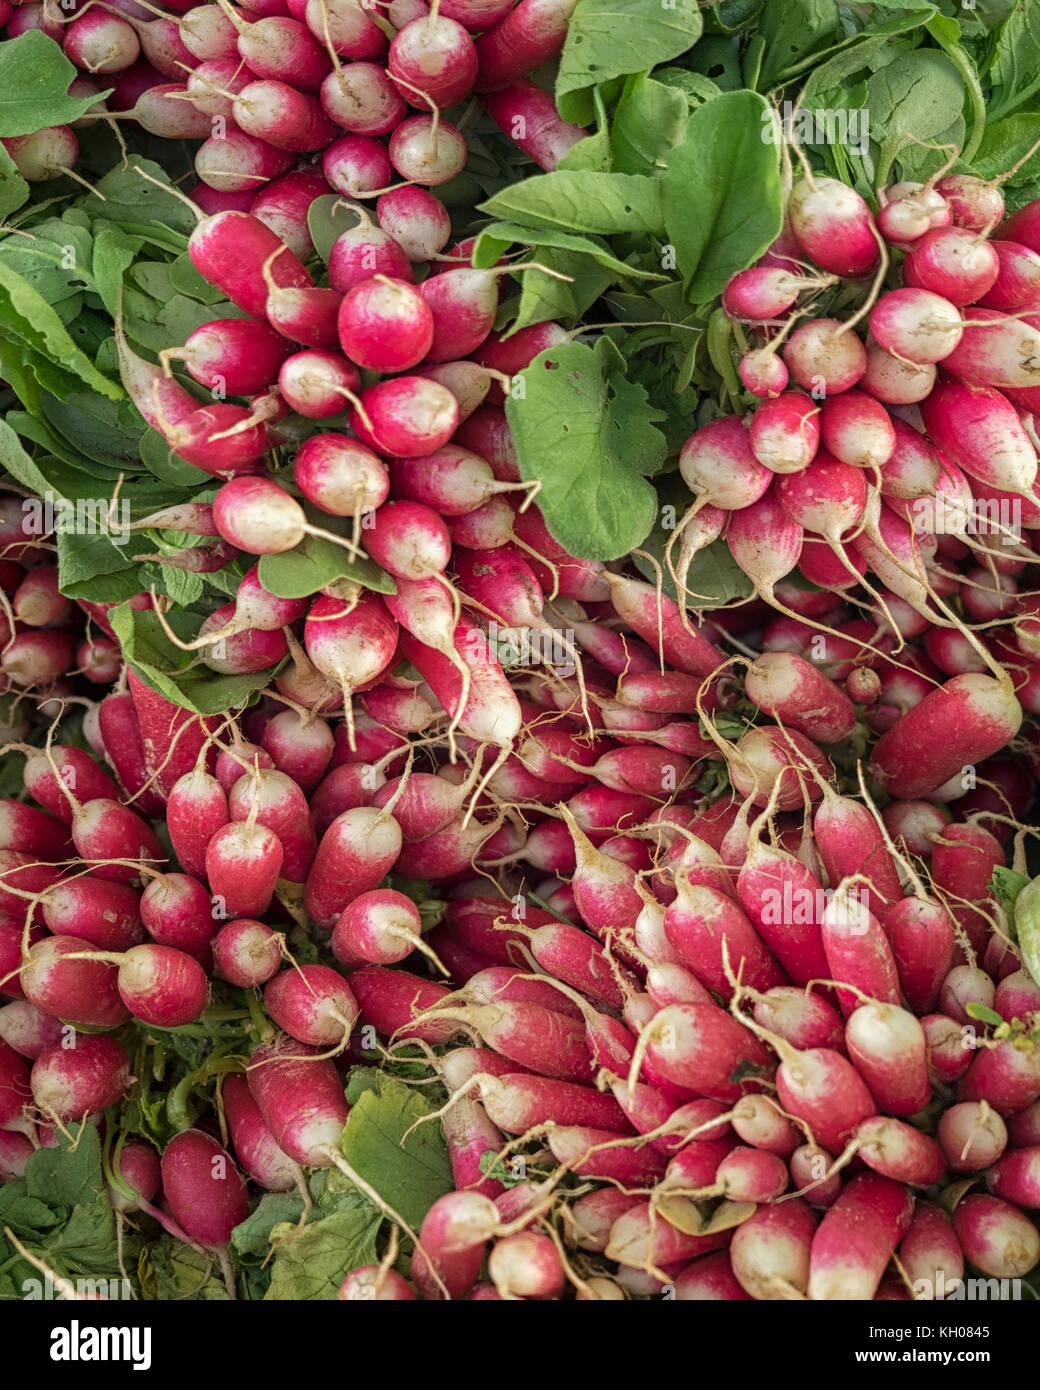 Closeup of bunches of fresh Radishes at a Market Stock Photo